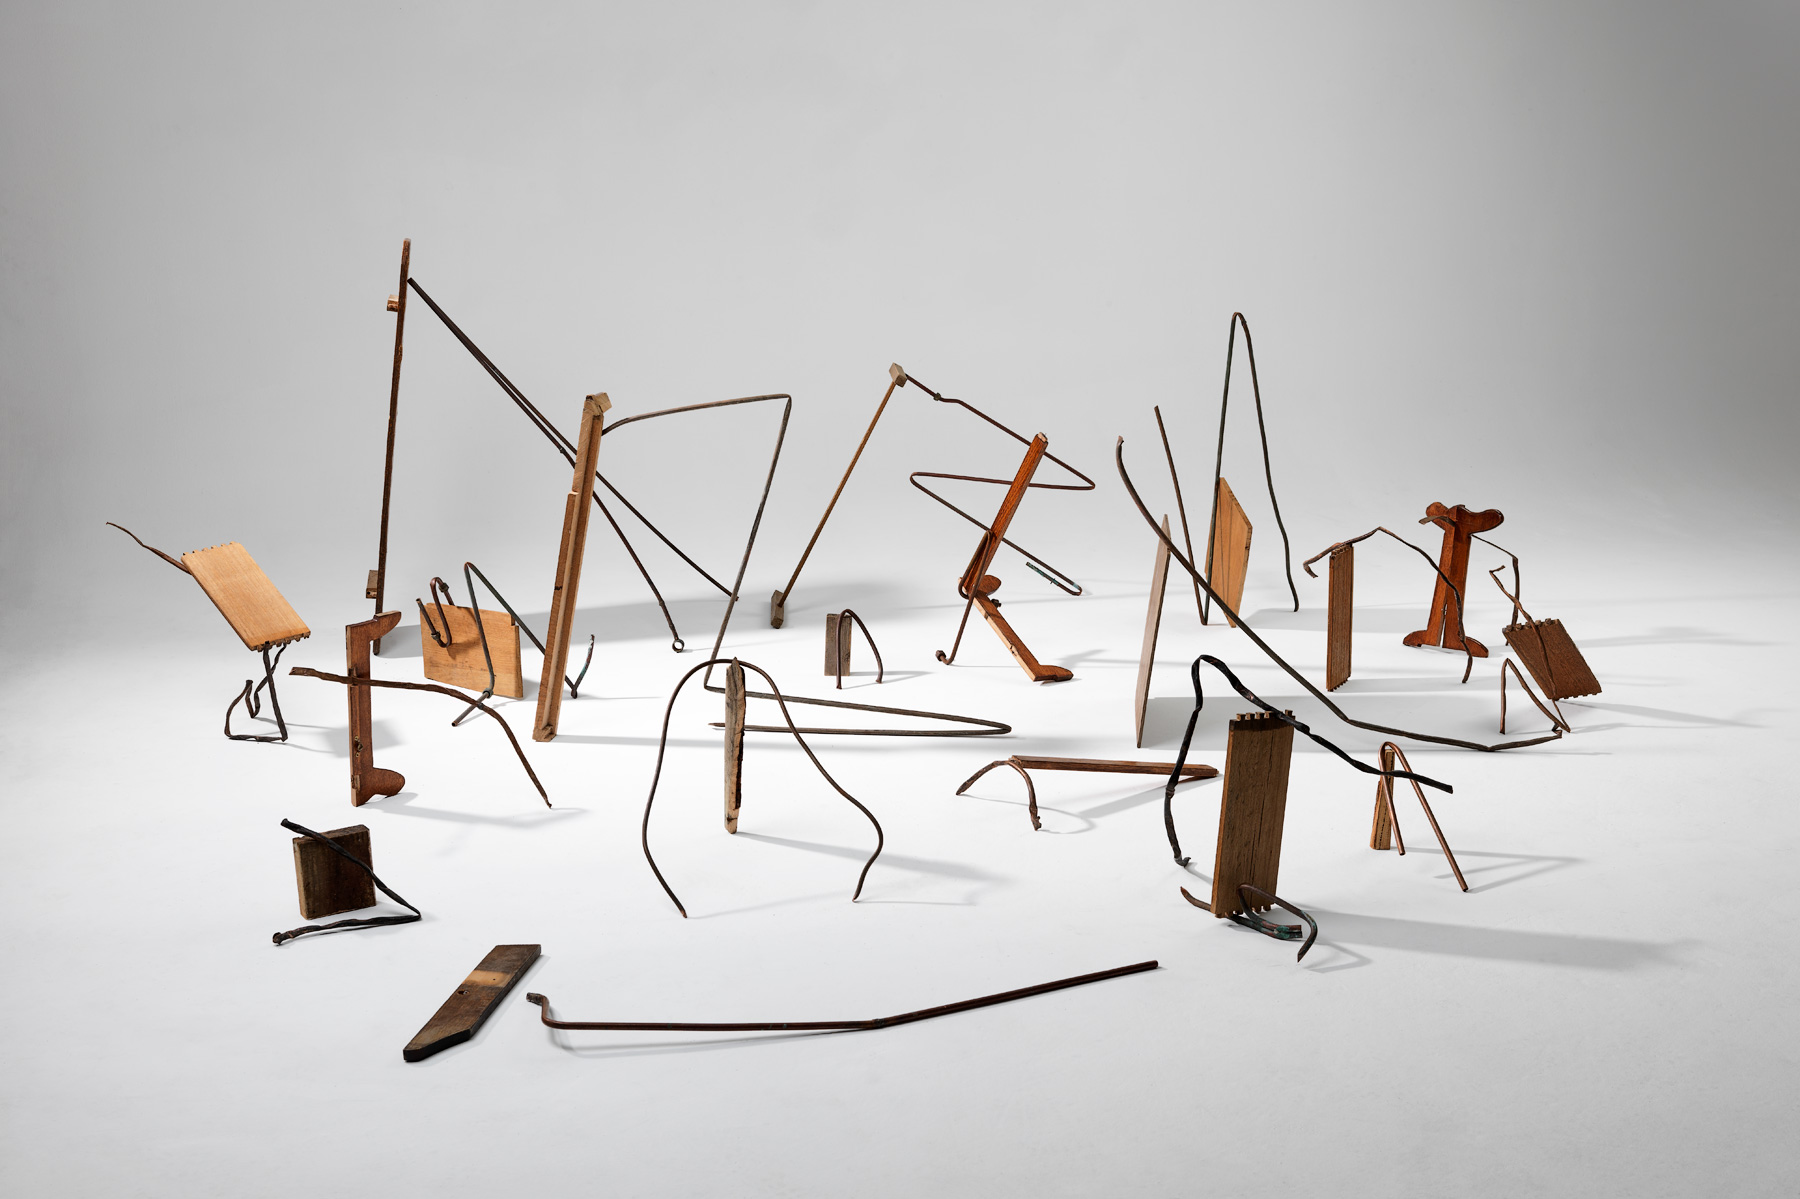   Open Cluster,  2018  copper piping, timber, timber laminate  approx 130 x 280 x 240 cm  Photograph Grant Hancock 